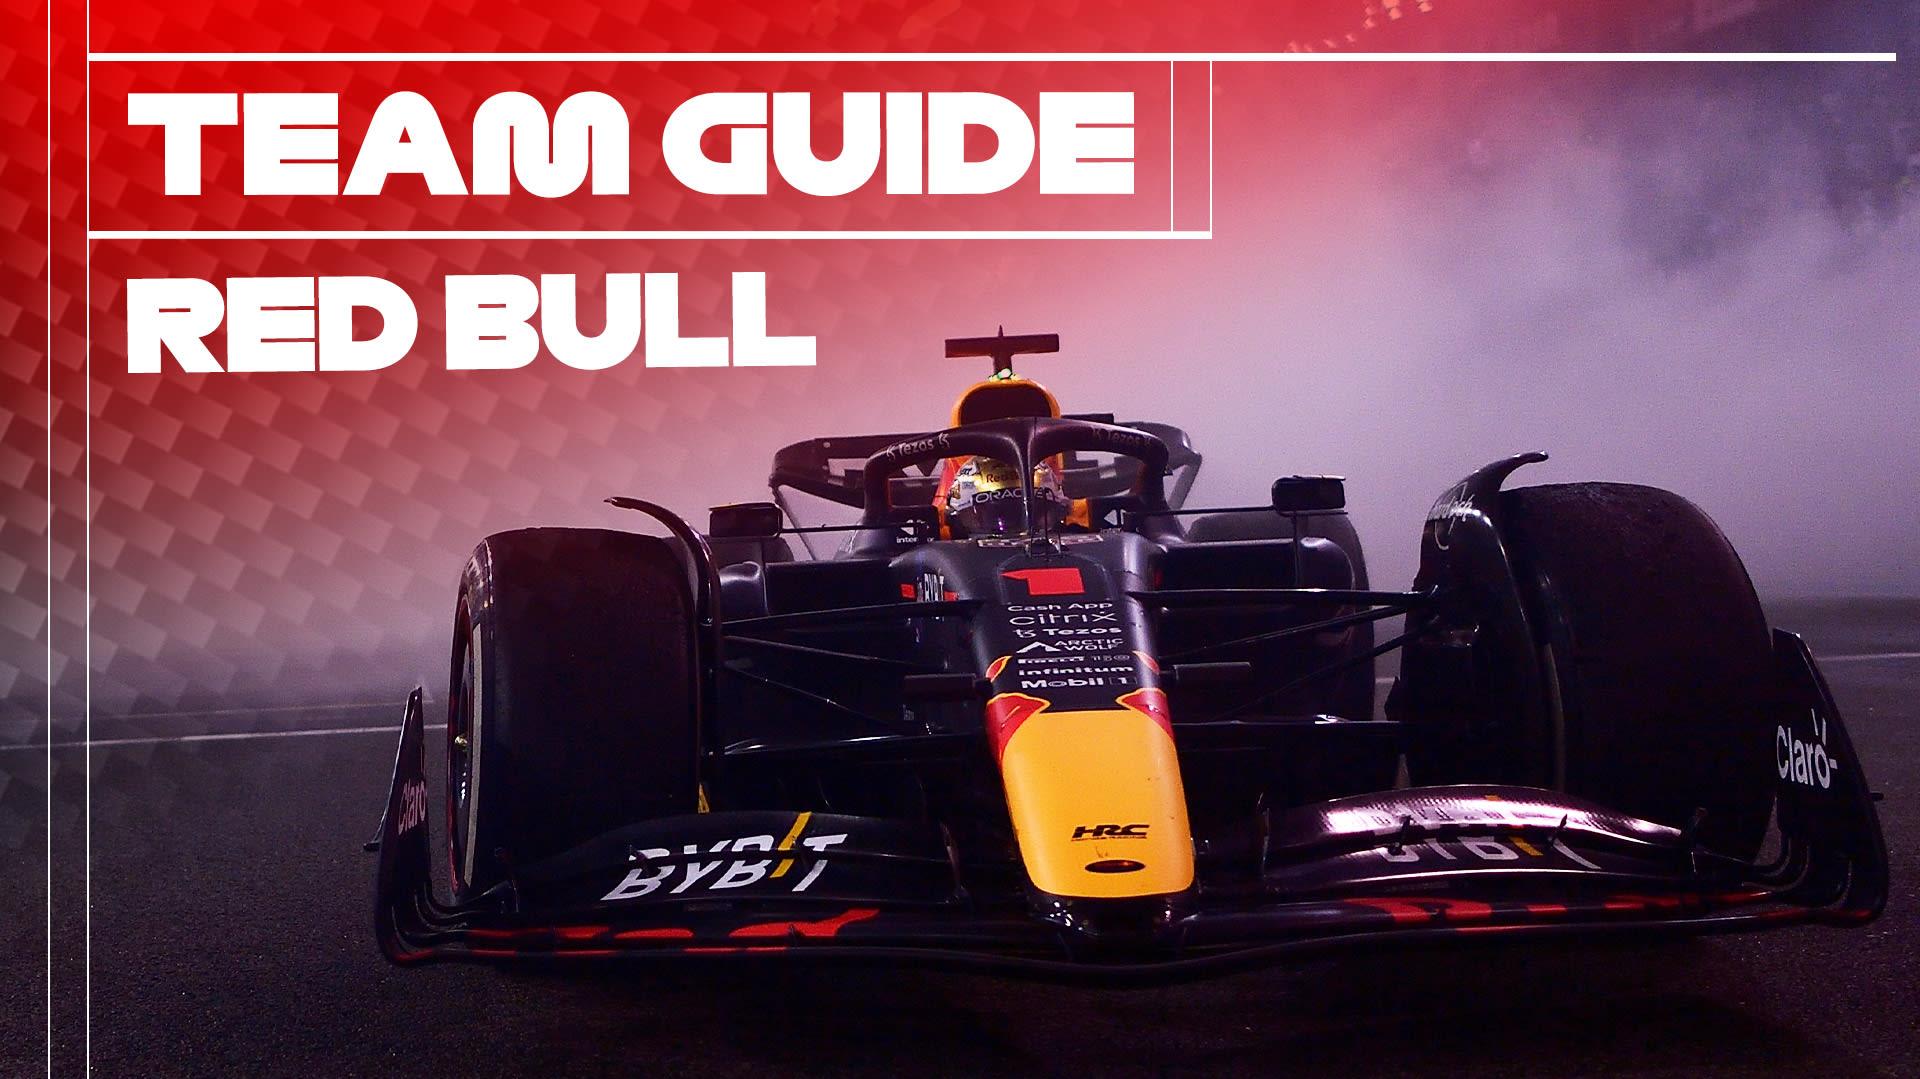 TEAM GUIDE Everything you need to know about F1 champions Red